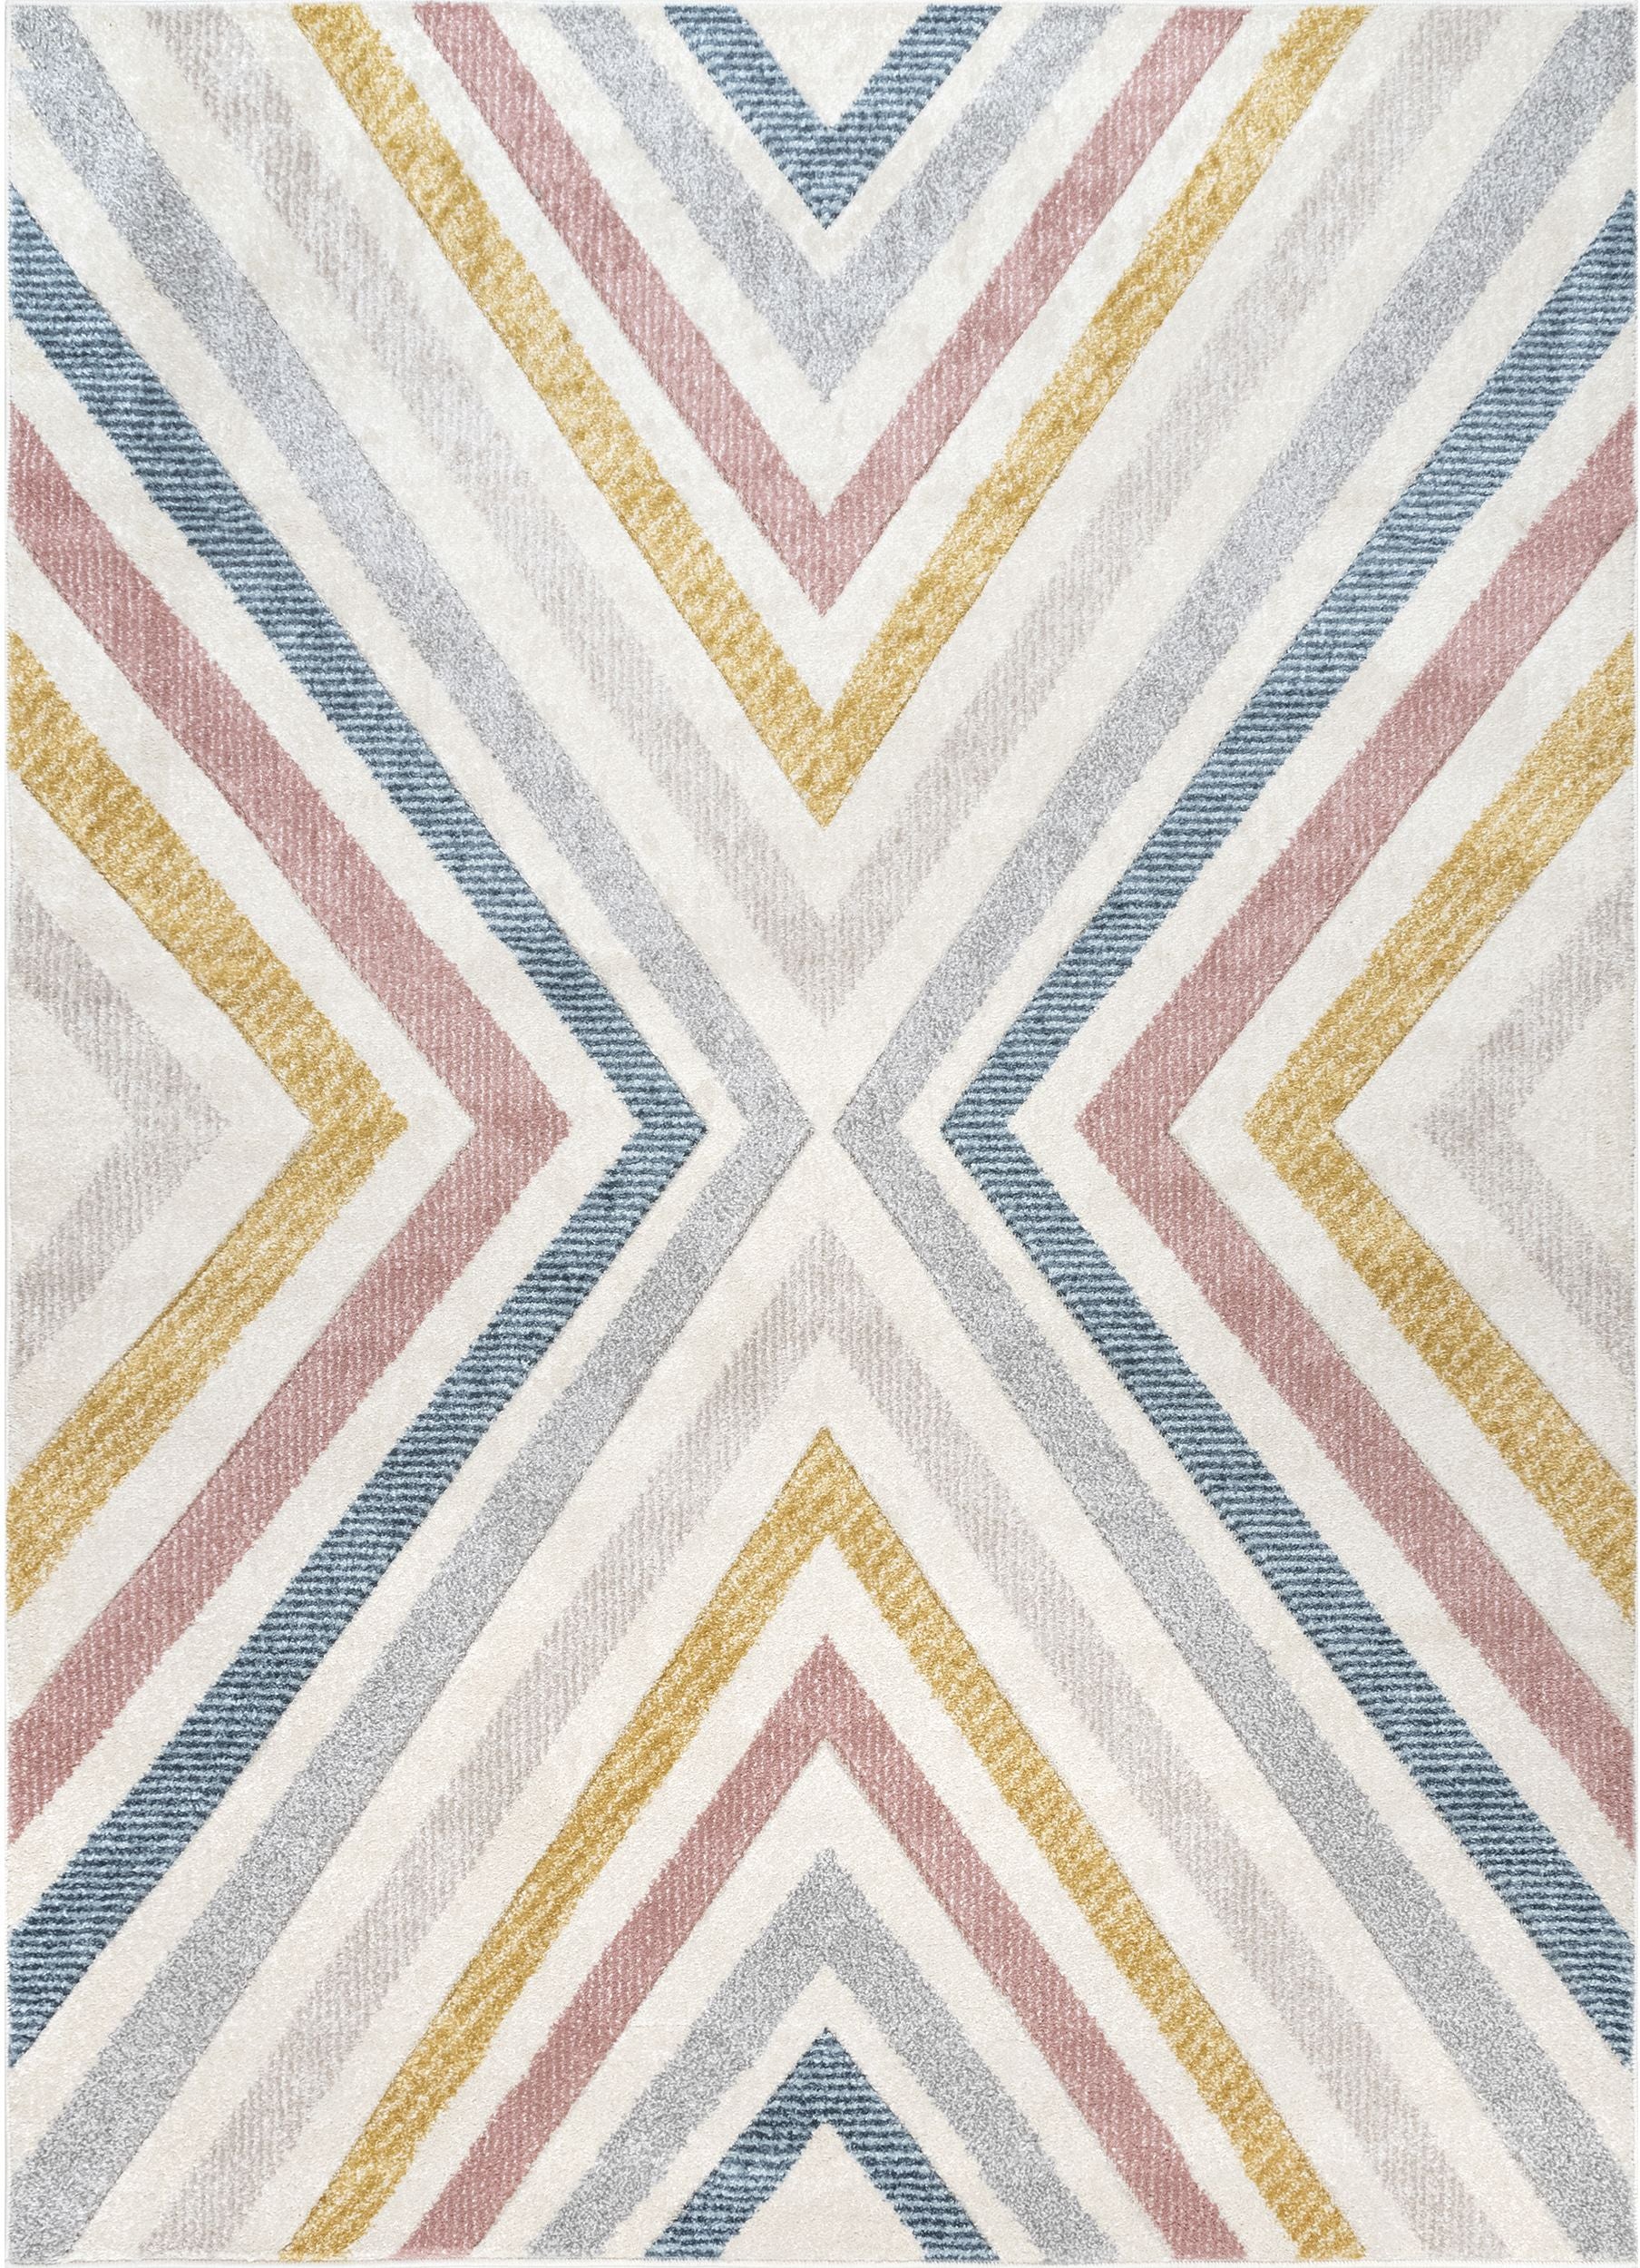 Nuloom Neveah Chevron Nne1922A Beige Area Rug